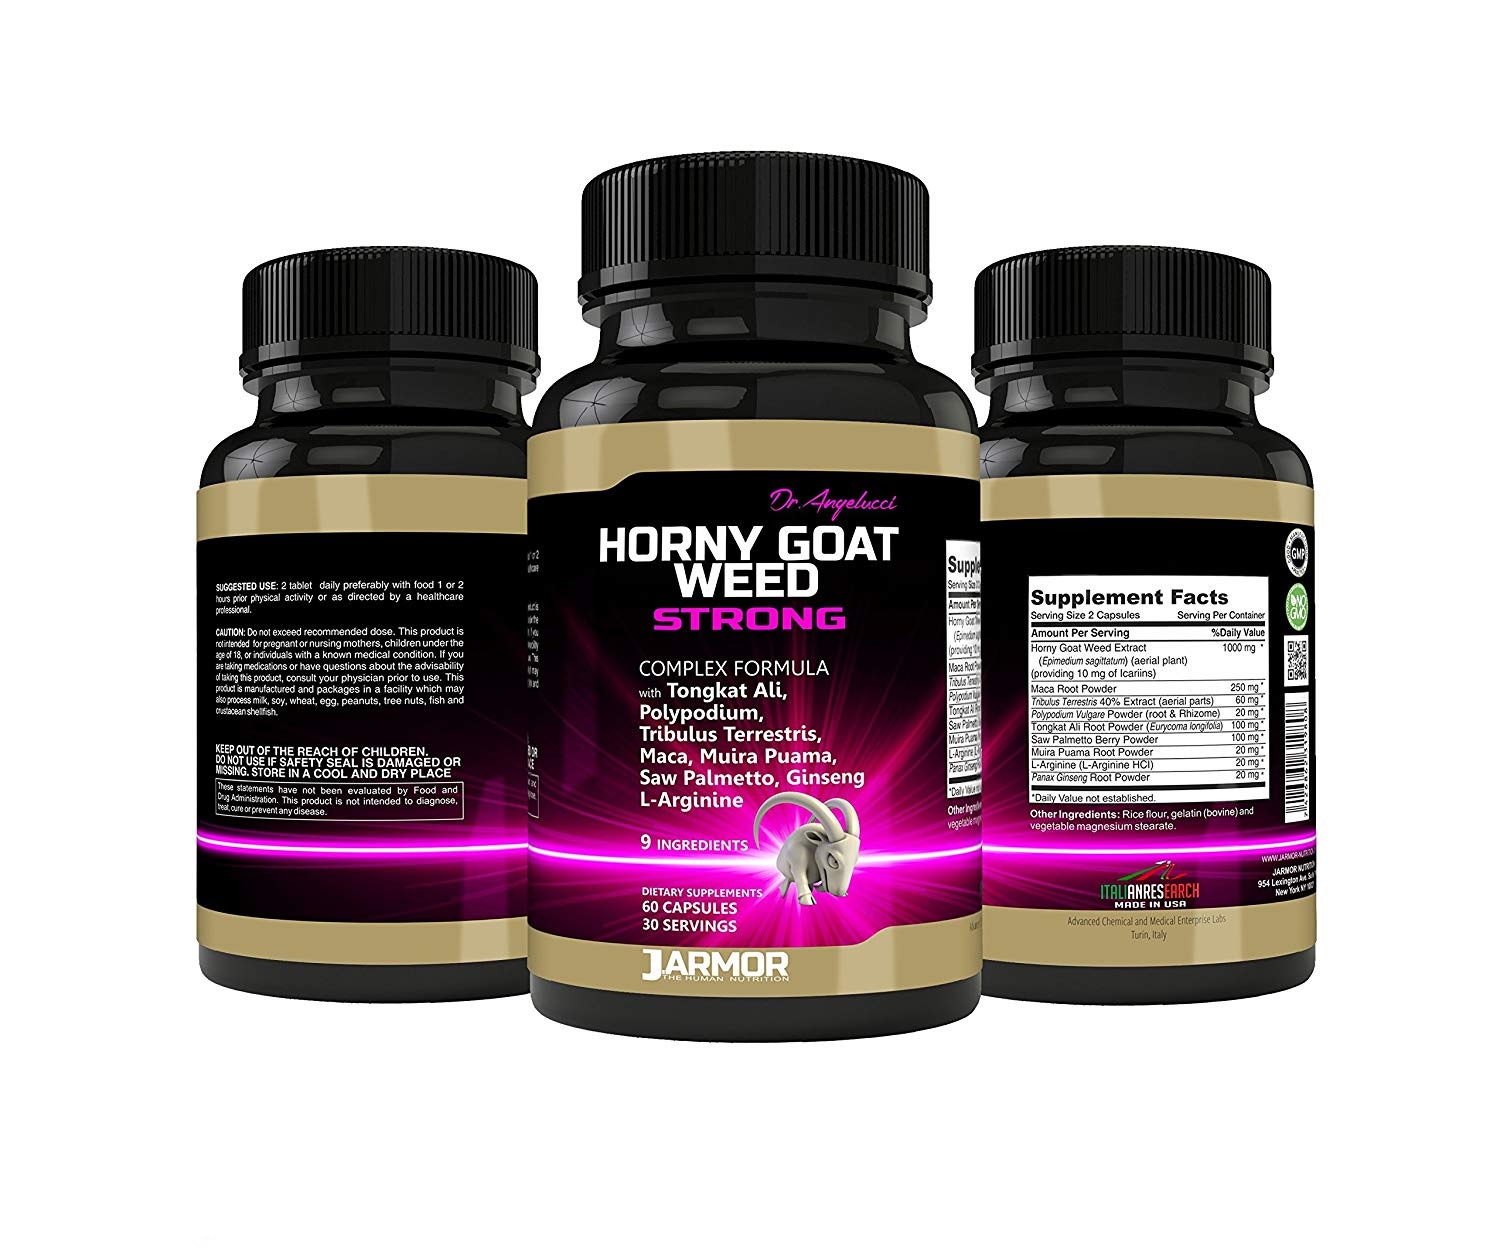 J.armor Horny Goat Weed Test Booster Review